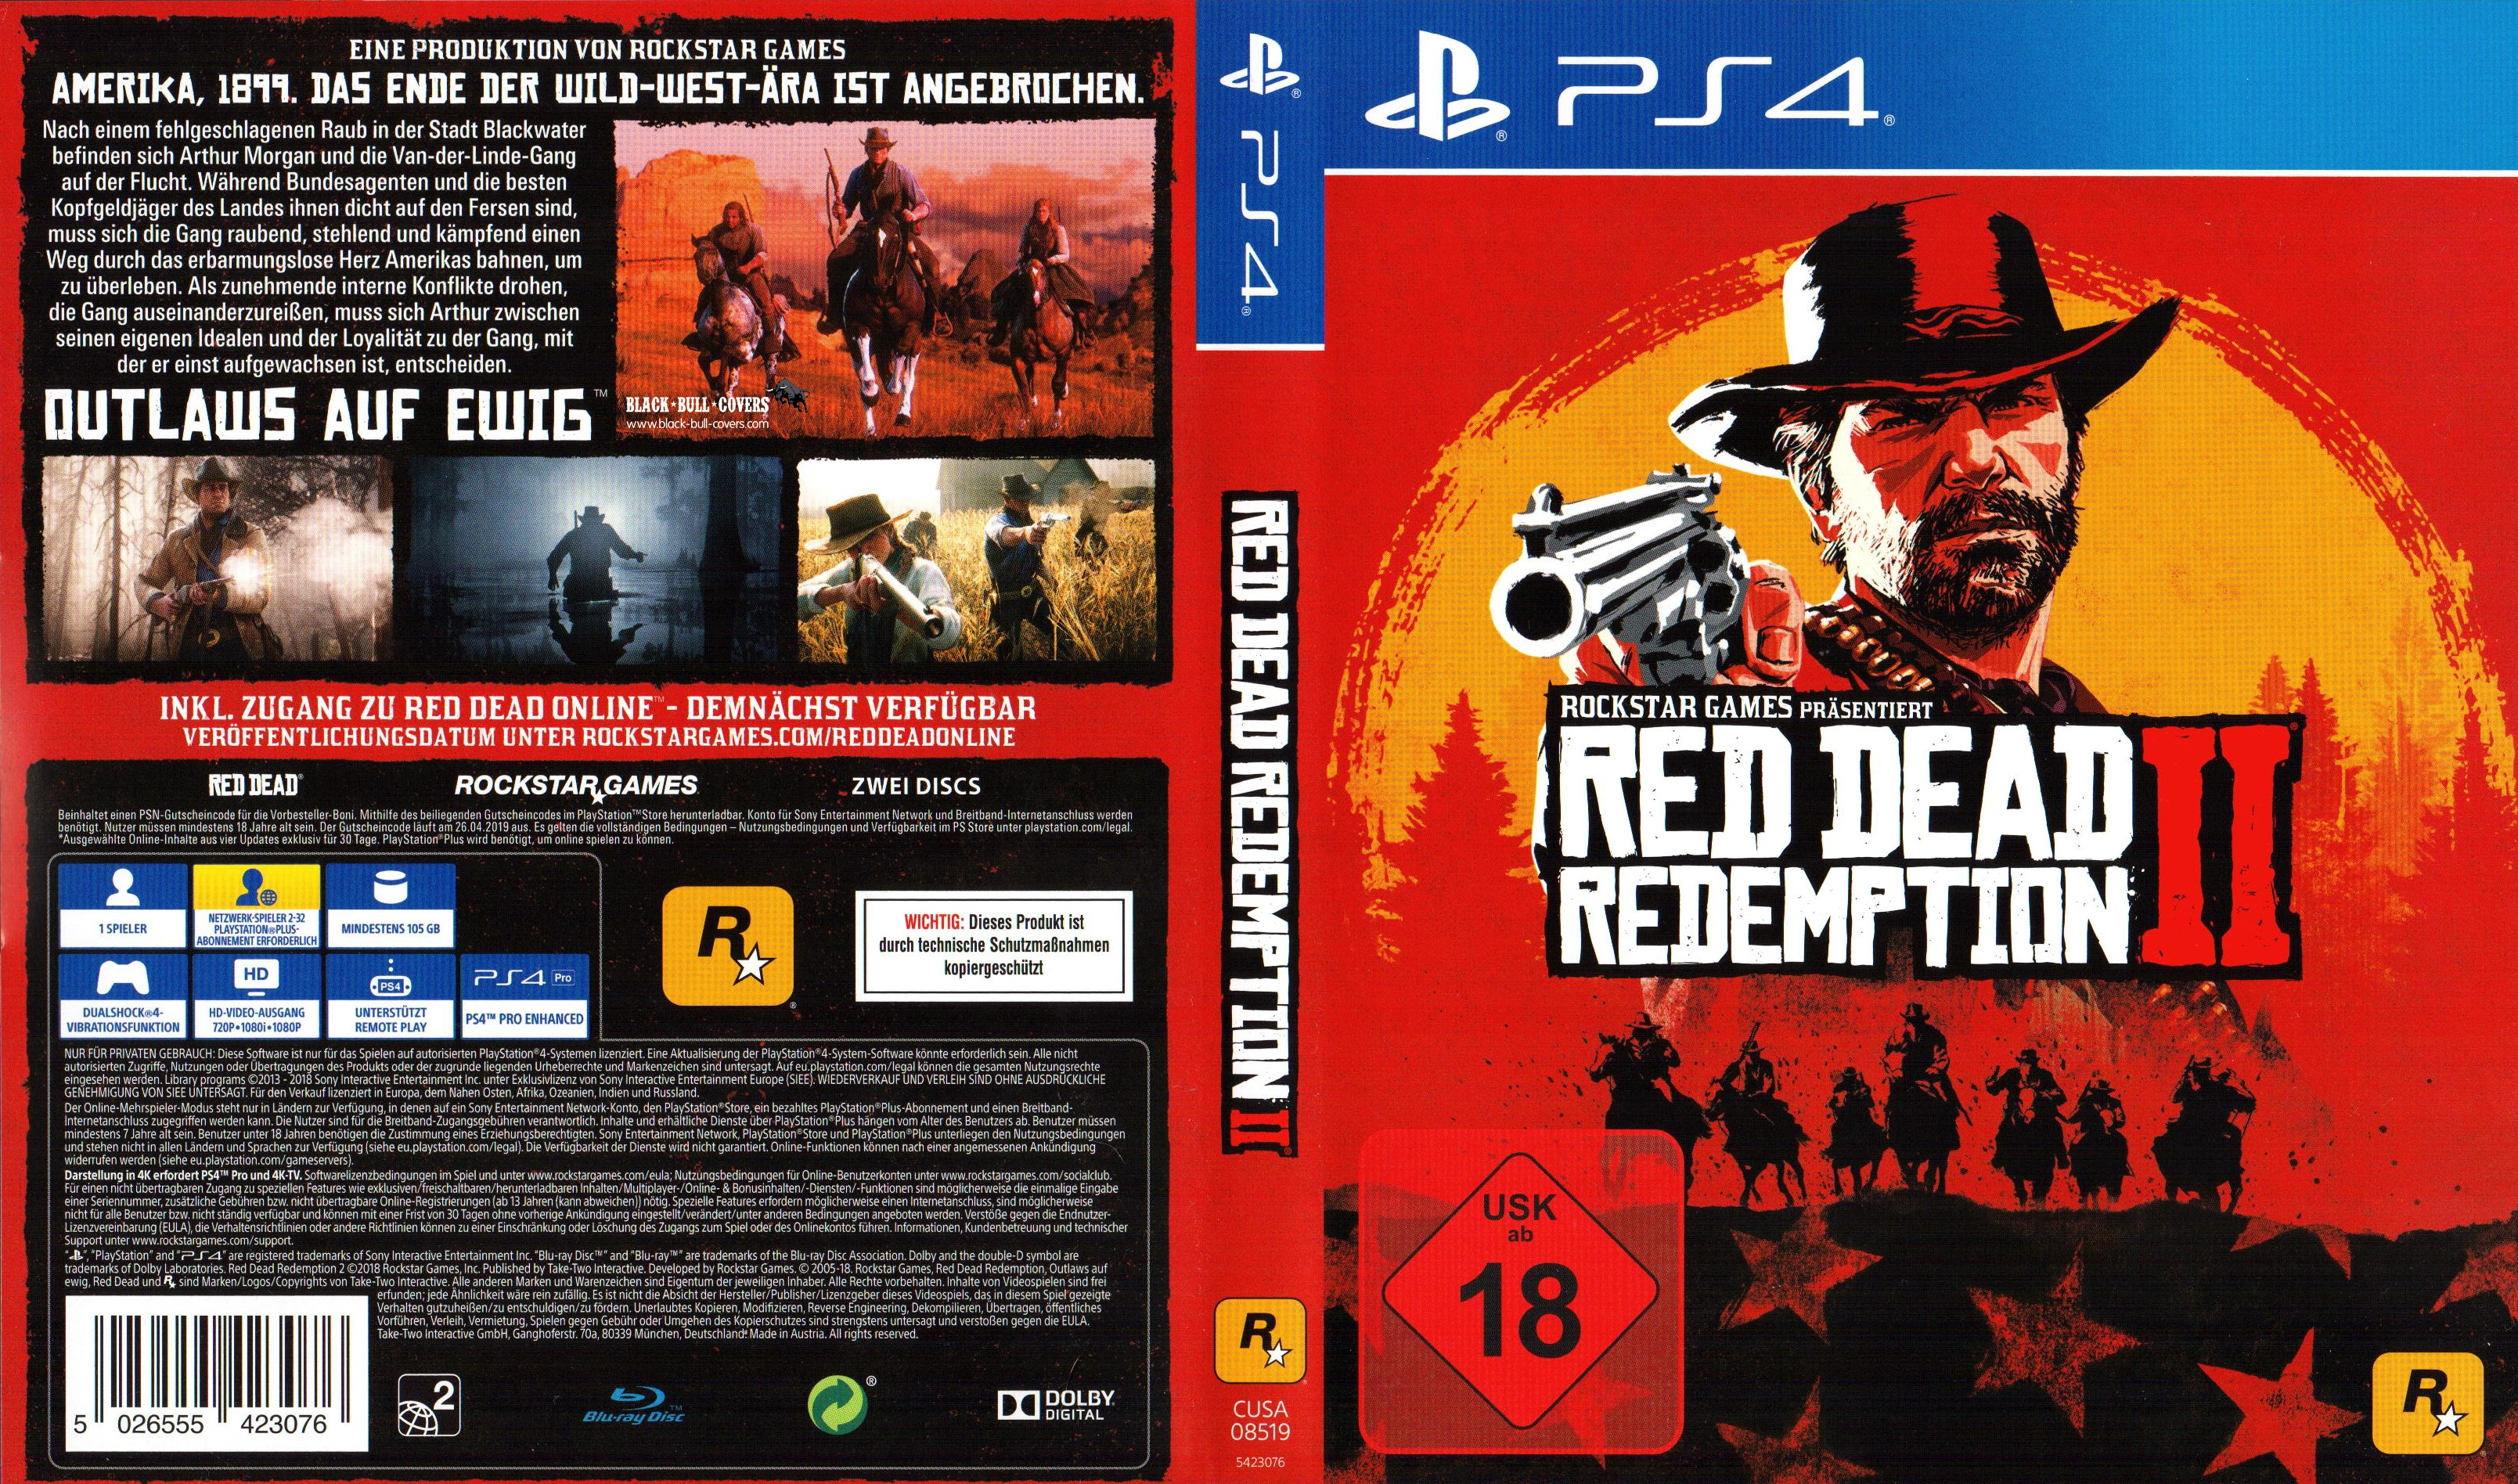 Игра red ps4. Rdr 2 ps4 диск. Red Dead Redemption 2 ps4 обложка. Ред дед редемпшен 2 ps4. Red Dead Redemption 2 диск пс4.